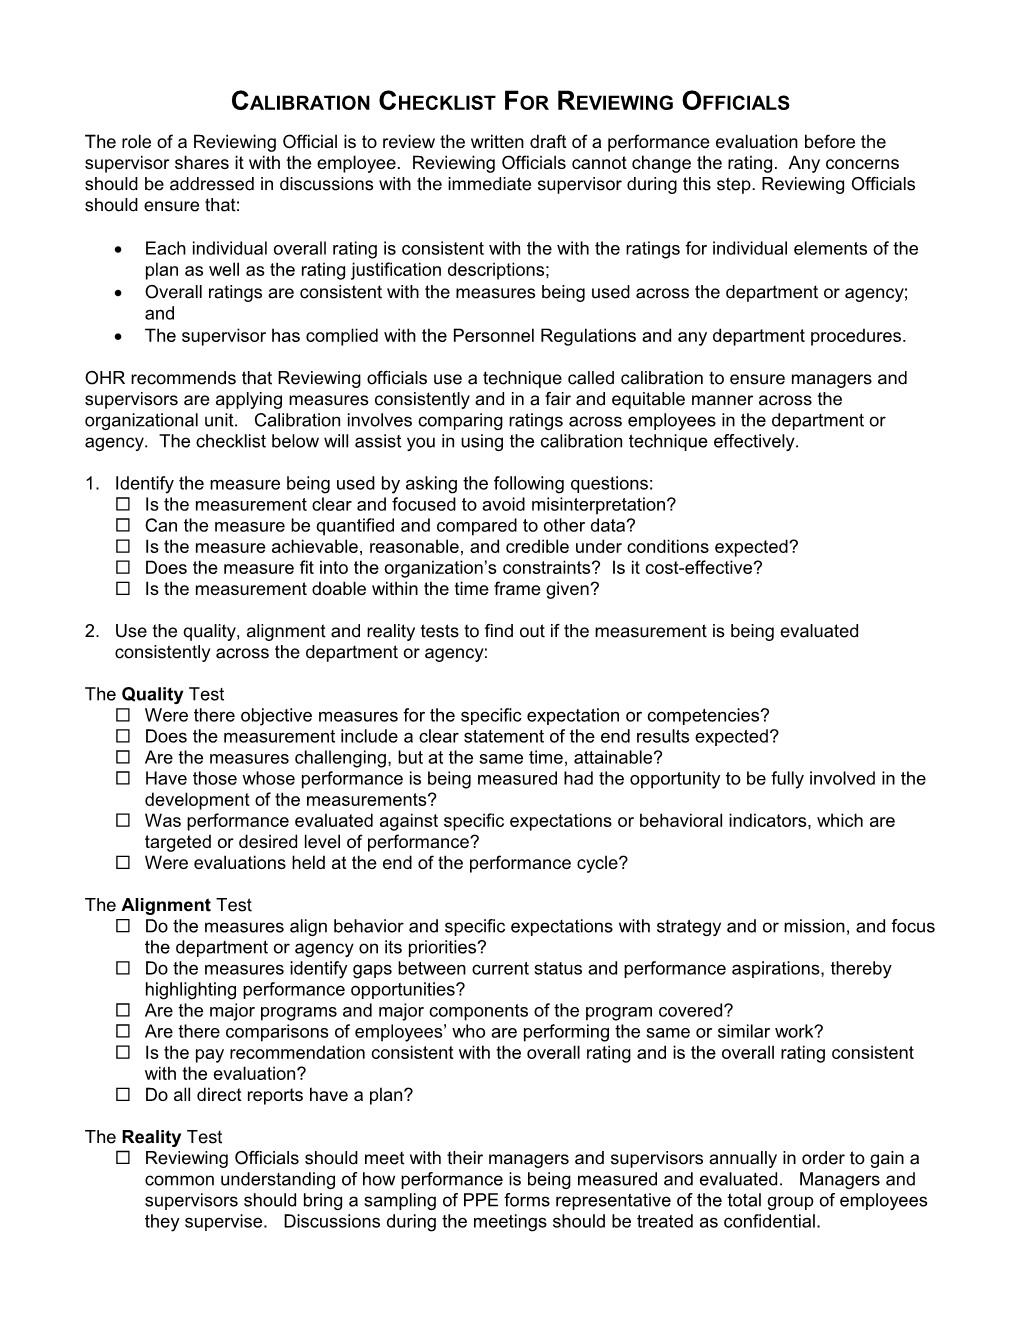 Calibration Checklist for Reviewing Officials